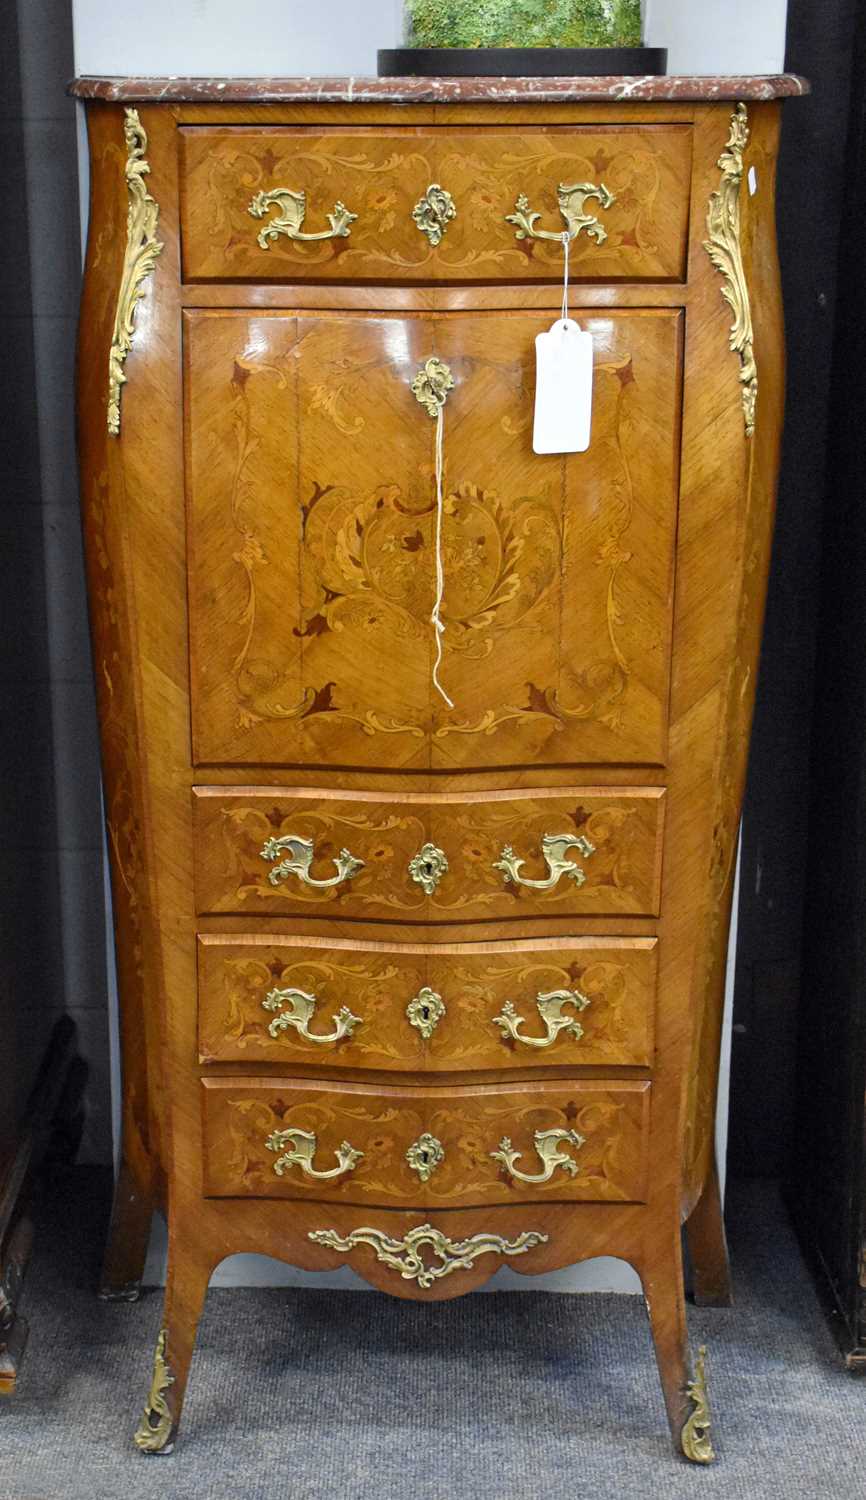 A 19th Century French Inlaid Secretaire Cabinet, serpentine fronted, with marble top and gilt - Image 2 of 2